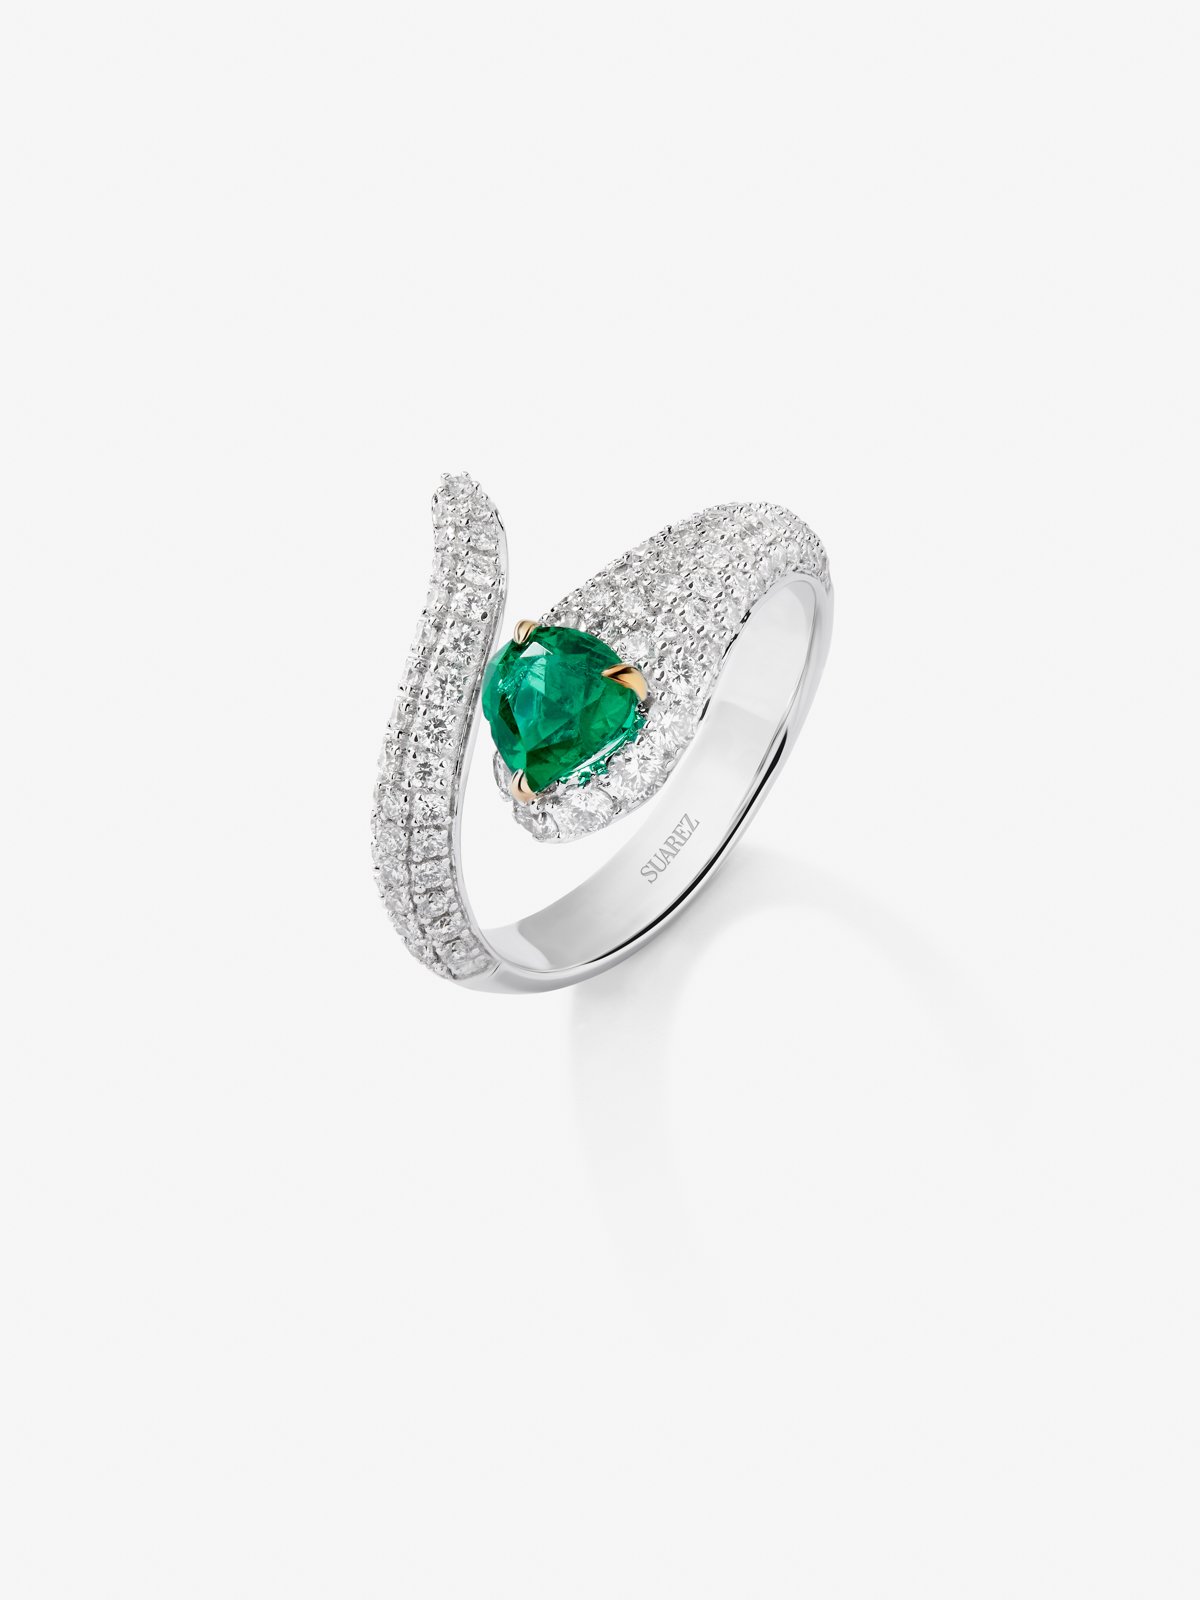 You and I 18k White Gold Ring with Green Emerald in 0.64 cts and white diamonds in a brilliant 0.9 cts